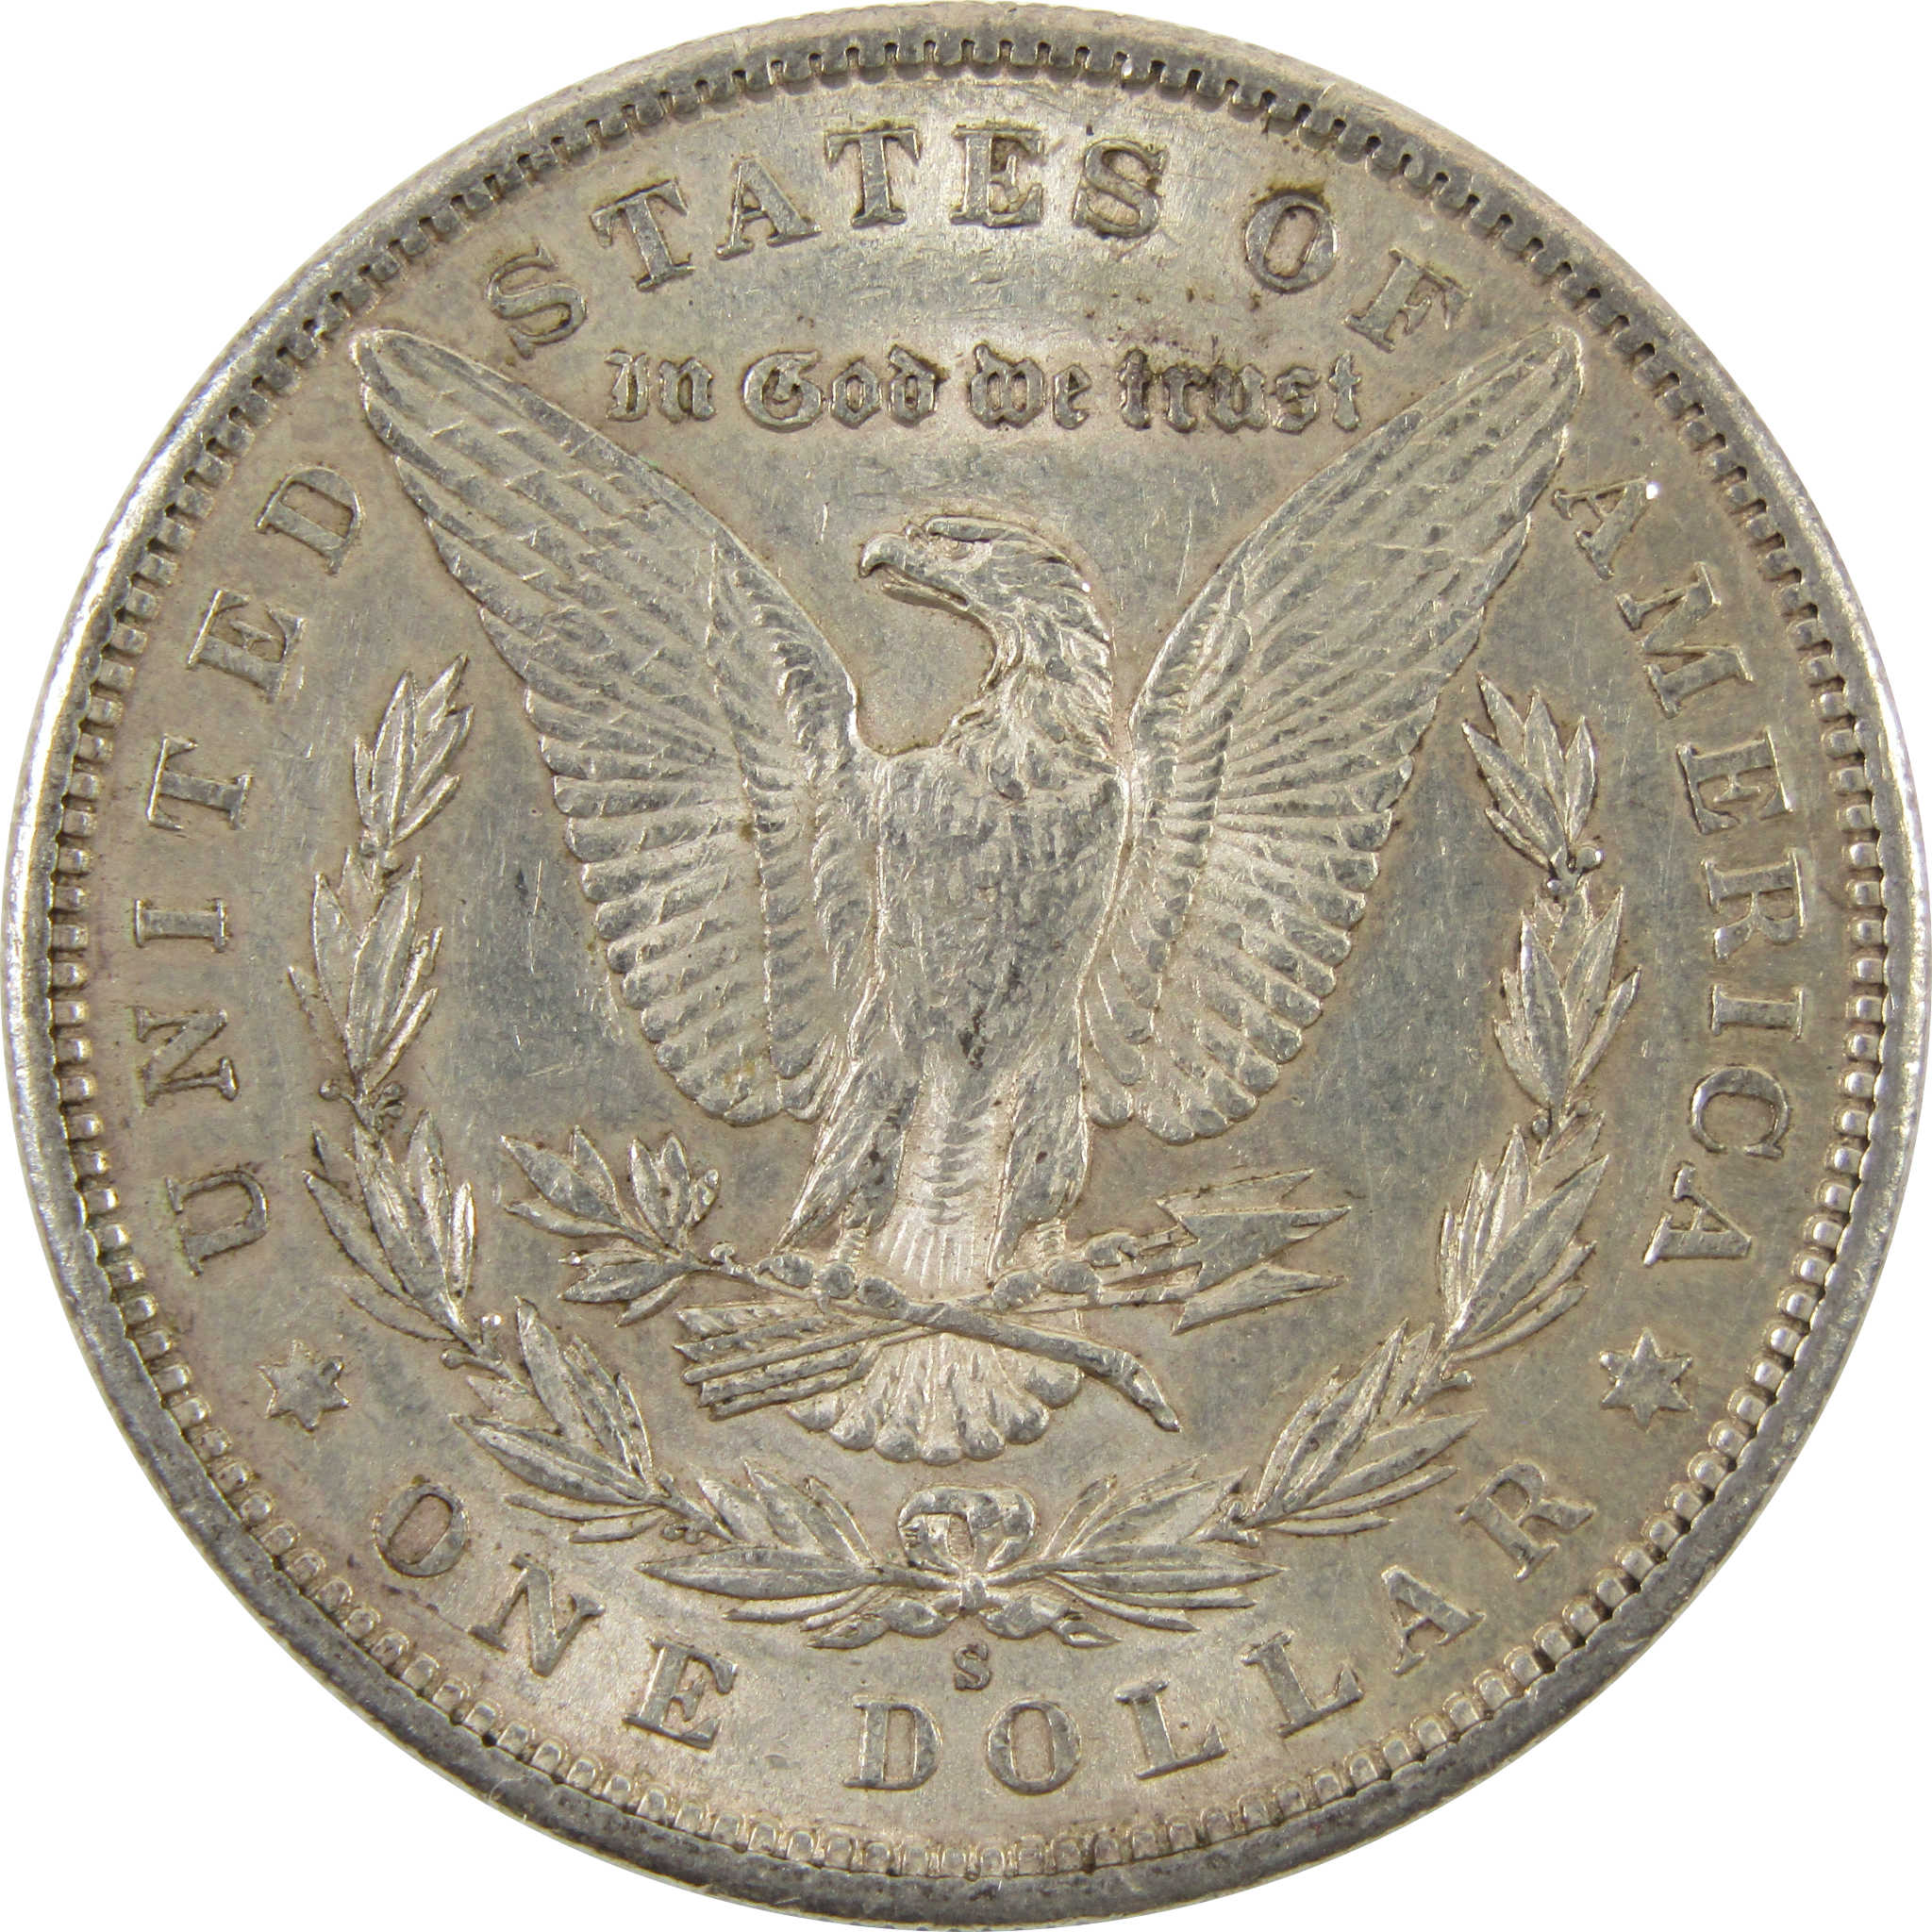 1890 S Morgan Dollar AU About Uncirculated 90% Silver $1 SKU:I10623 - Morgan coin - Morgan silver dollar - Morgan silver dollar for sale - Profile Coins &amp; Collectibles